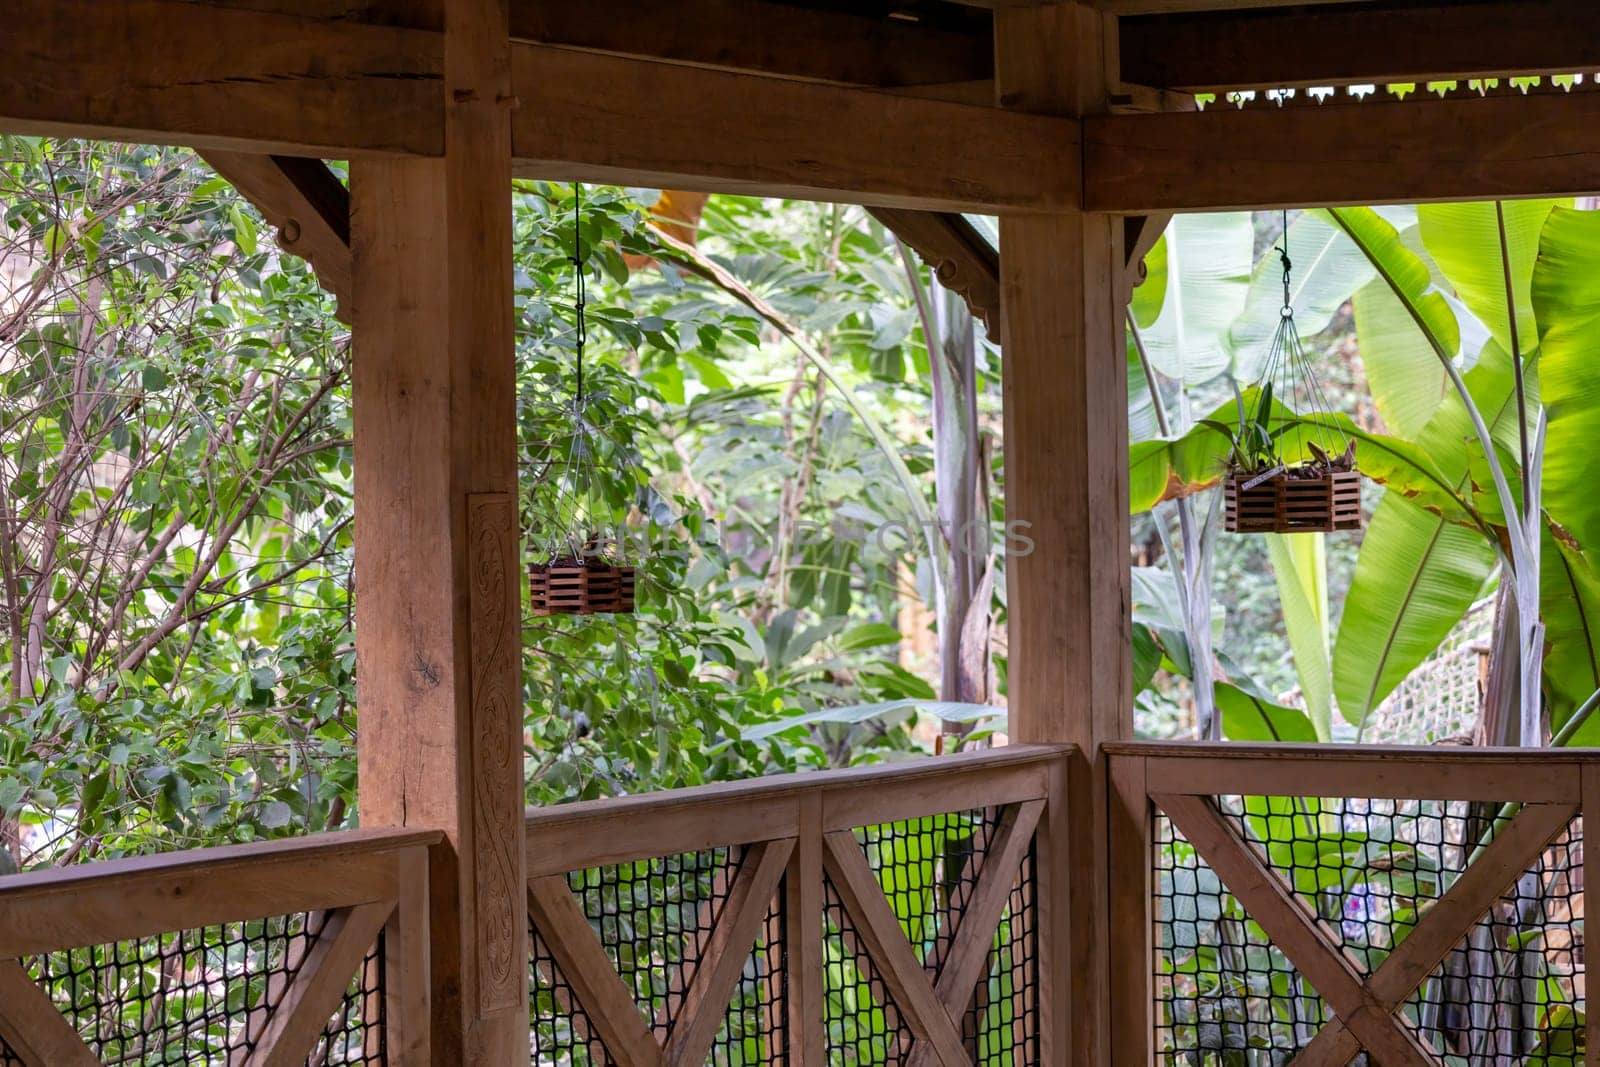 Amidst a lush forest, a charming wooden gazebo adorned with hanging baskets stands tall, inviting visitors to escape into the natural beauty of its surroundings